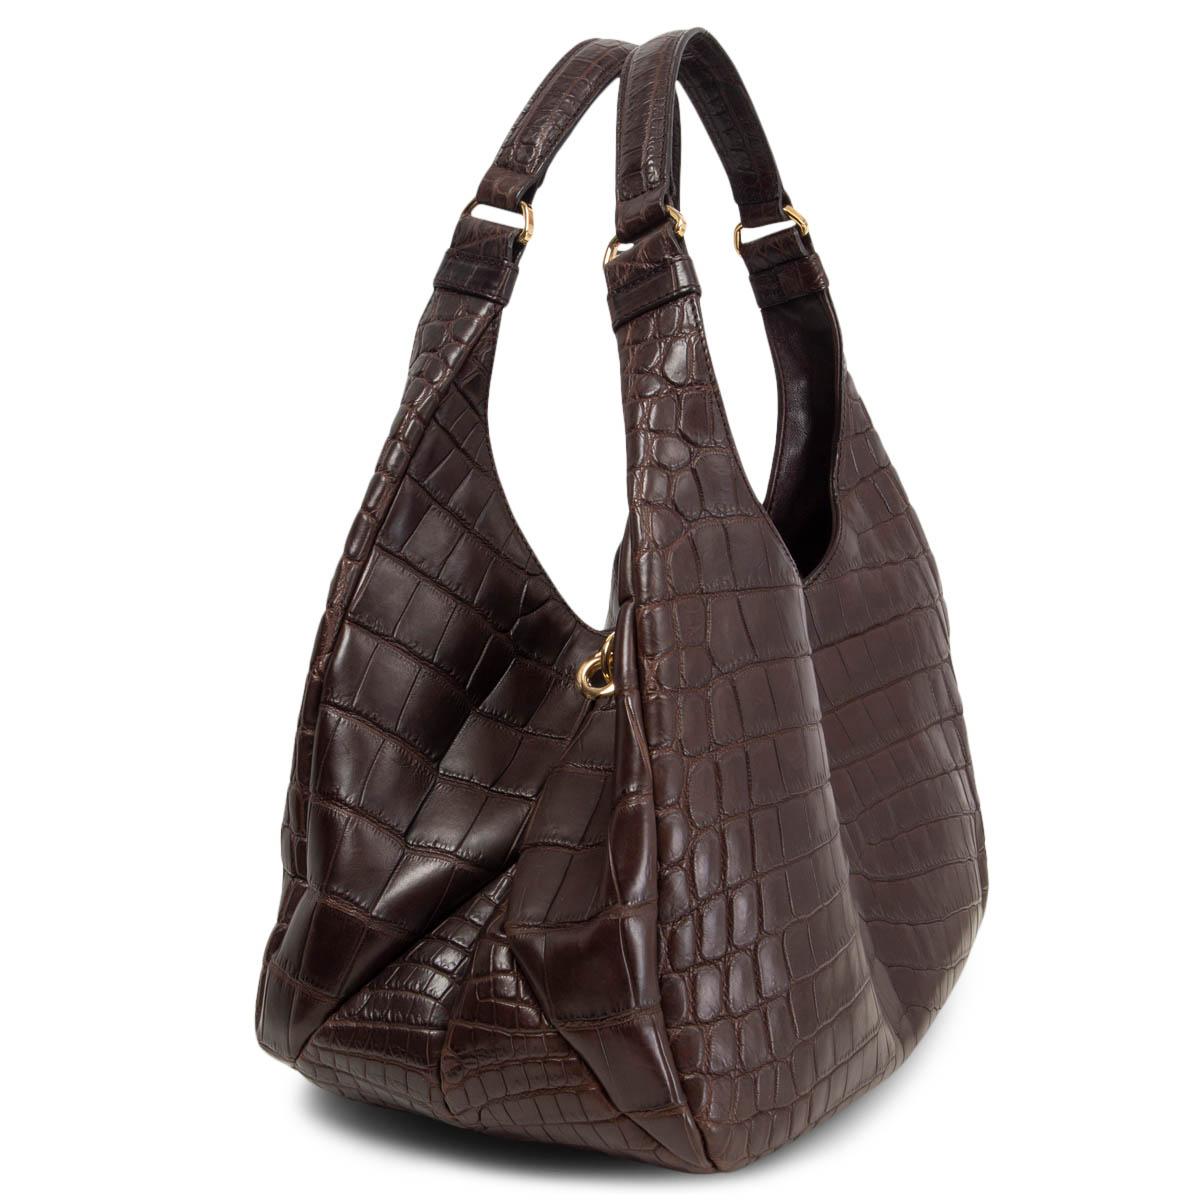 100% authentic Bottega Veneta shoulder bag in espresso brown matte crocodile. Closes with a magnet on top. Lined in light beige suede with a cell phone pocket against the front and a zipper pocket against the back. Has been carried and is in